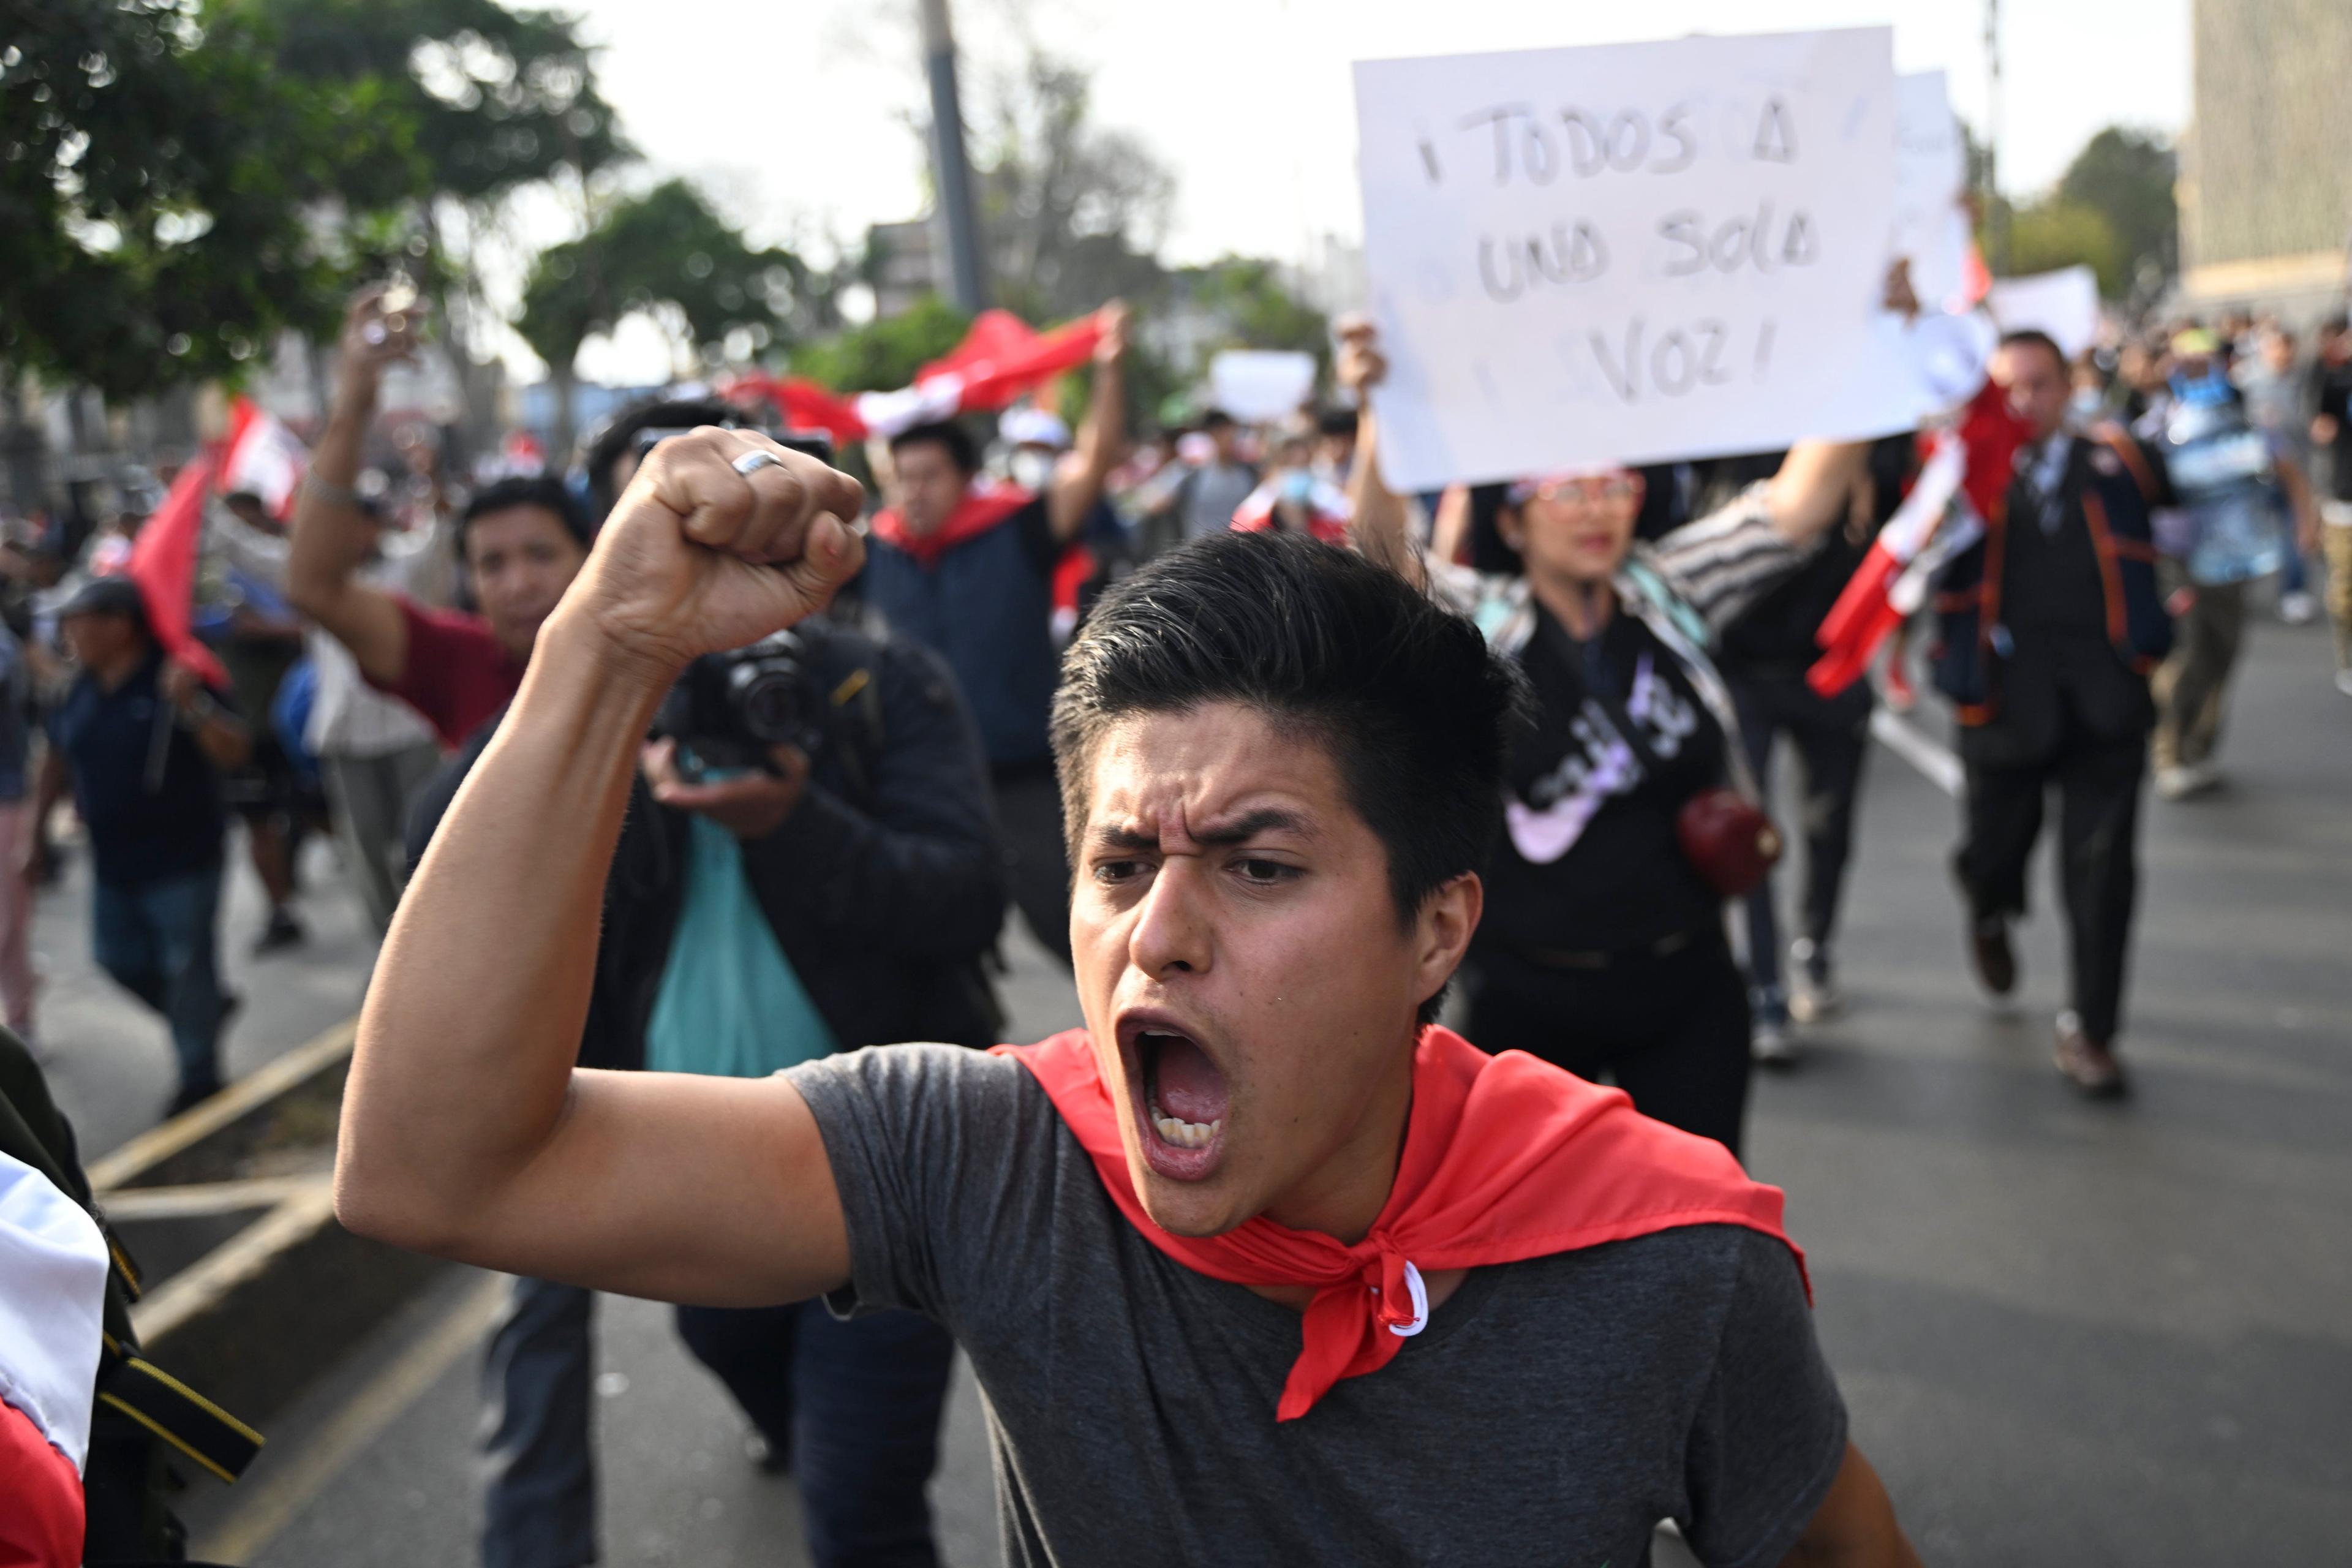 Supporters of former President Pedro Castillo shout slogans during a protest near the Congress in Lima on December 12, 2022. - Two more protesters died in Peru on Monday during demonstrations against the ousting of former president Pedro Castillo, the rights ombudsman said. (Photo by ERNESTO BENAVIDES / AFP)